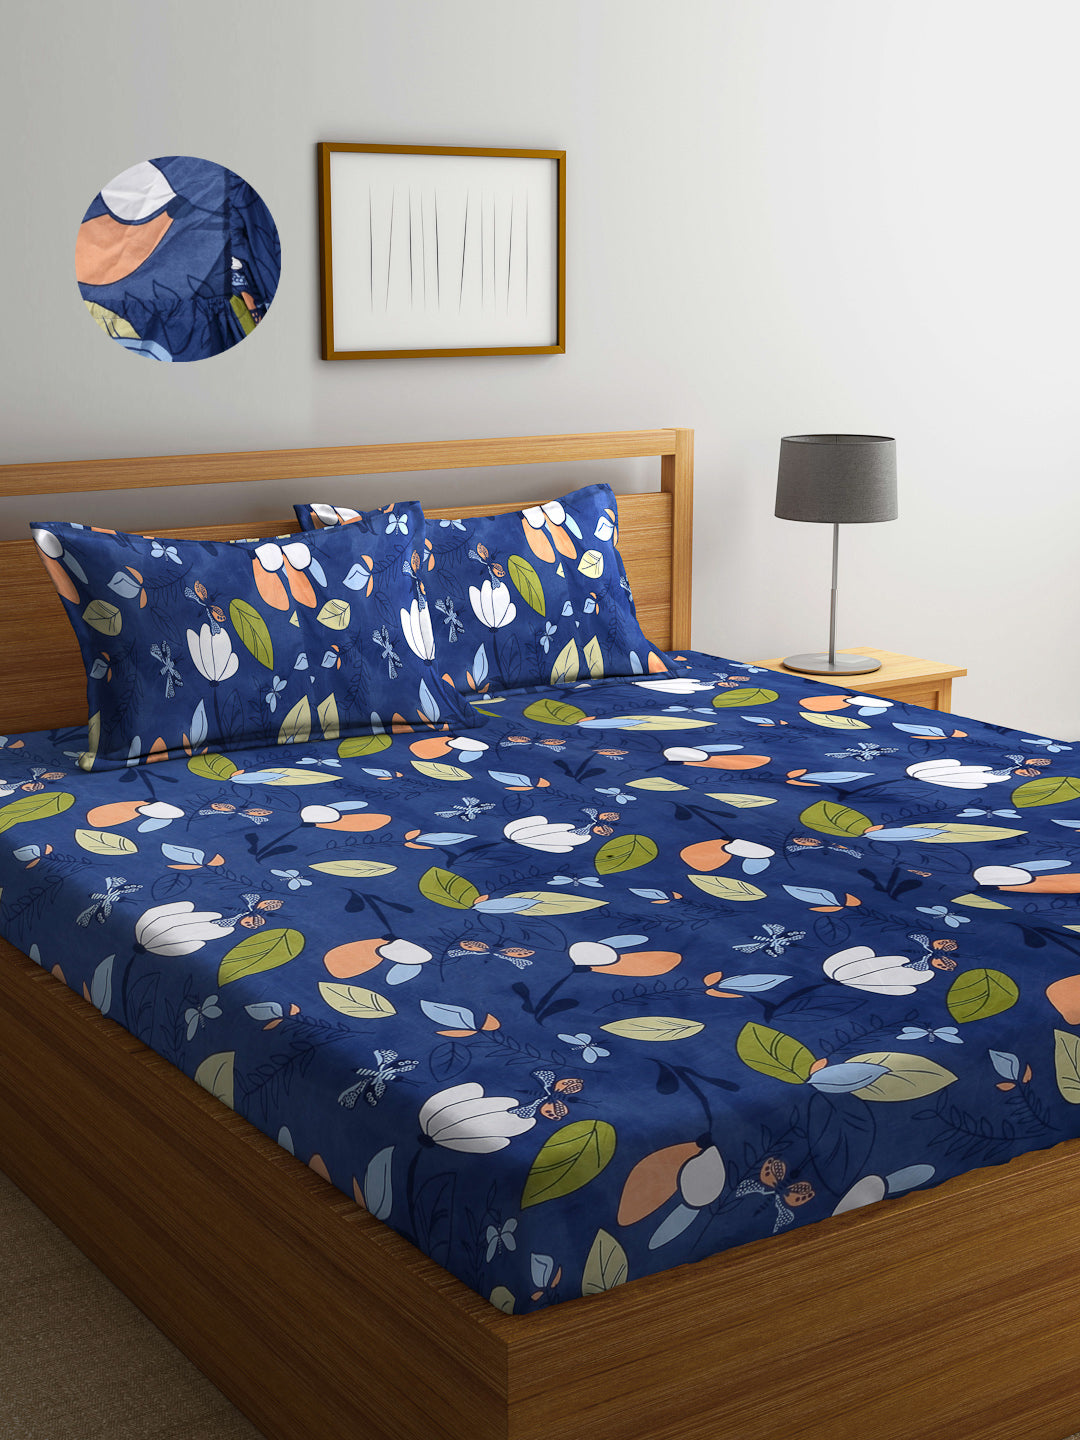 Arrabi Blue Leaf TC Cotton Blend Super King Size Fitted Bedsheet with 2 Pillow Covers (270 x 260 cm)